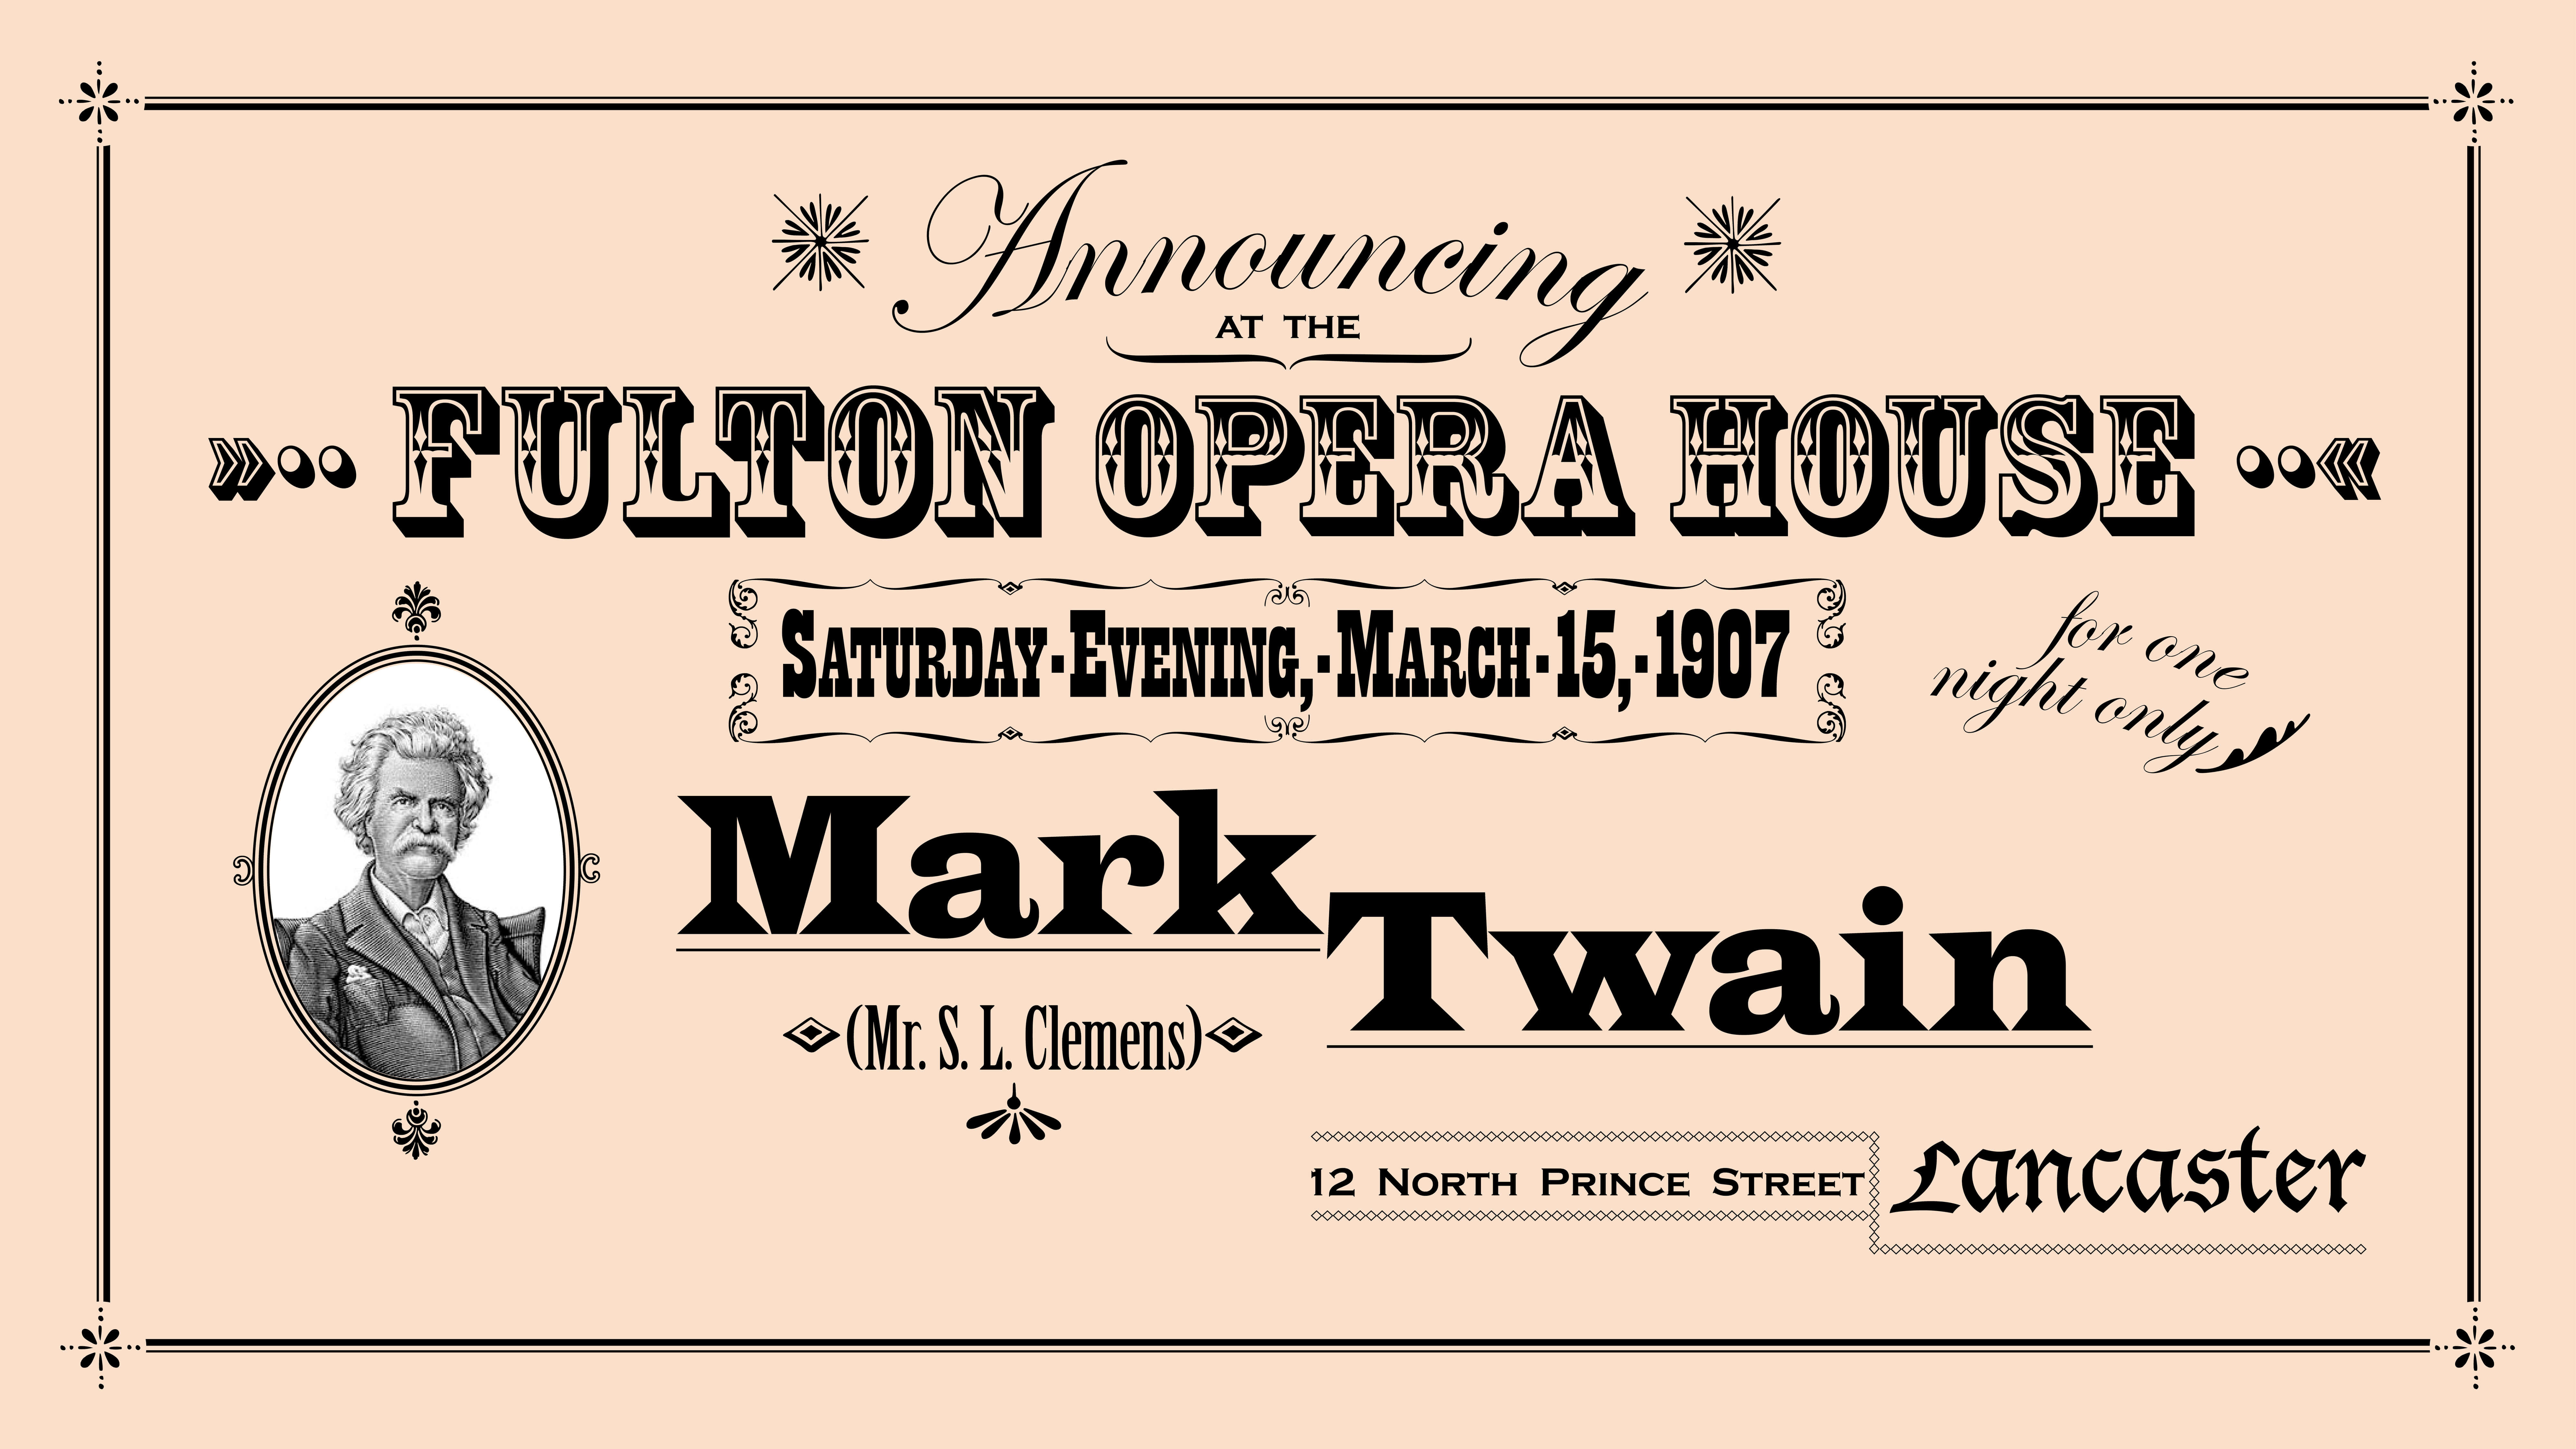 Mark Twain lectures at Lancaster's Fulton Opera House